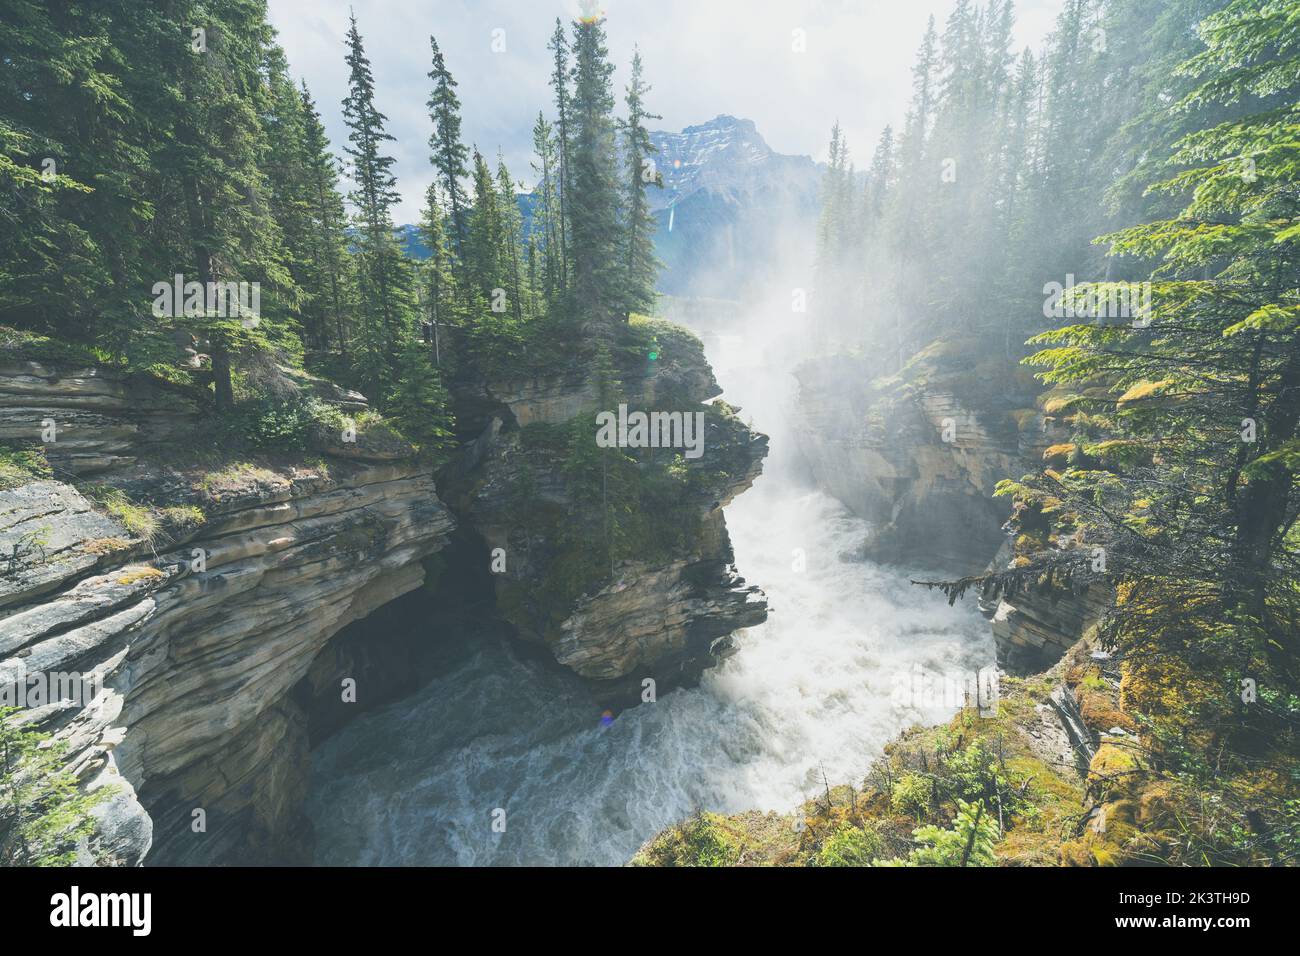 Very misty morning view of Athabasca Falls waterfall in Jasper National Park Canada Stock Photo